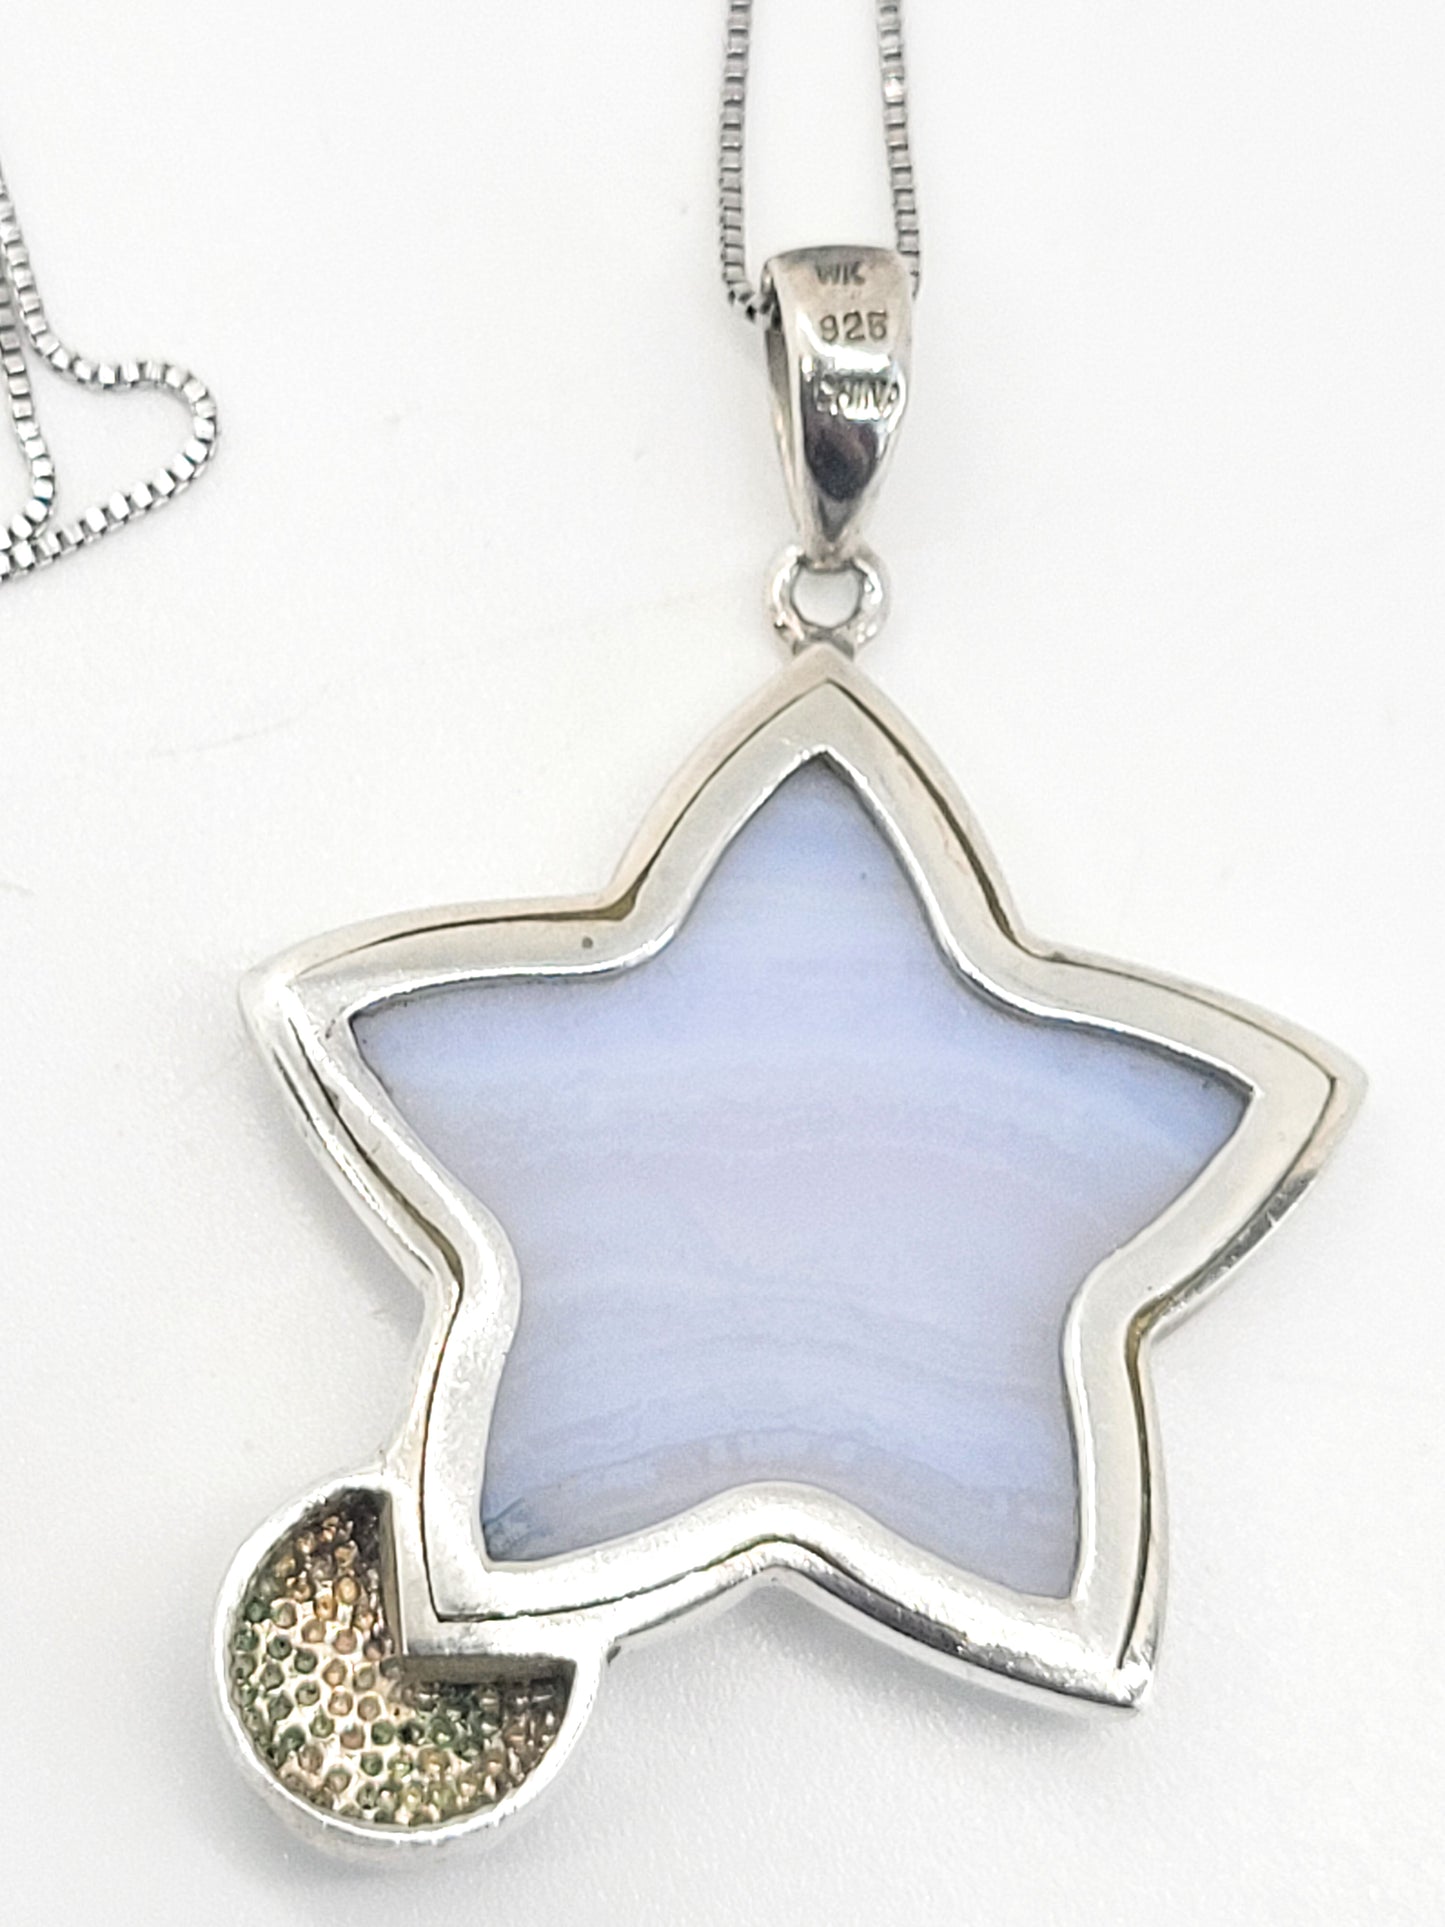 Whitney Kelly WK Blue lace agate star and amethyst sterling silver necklace